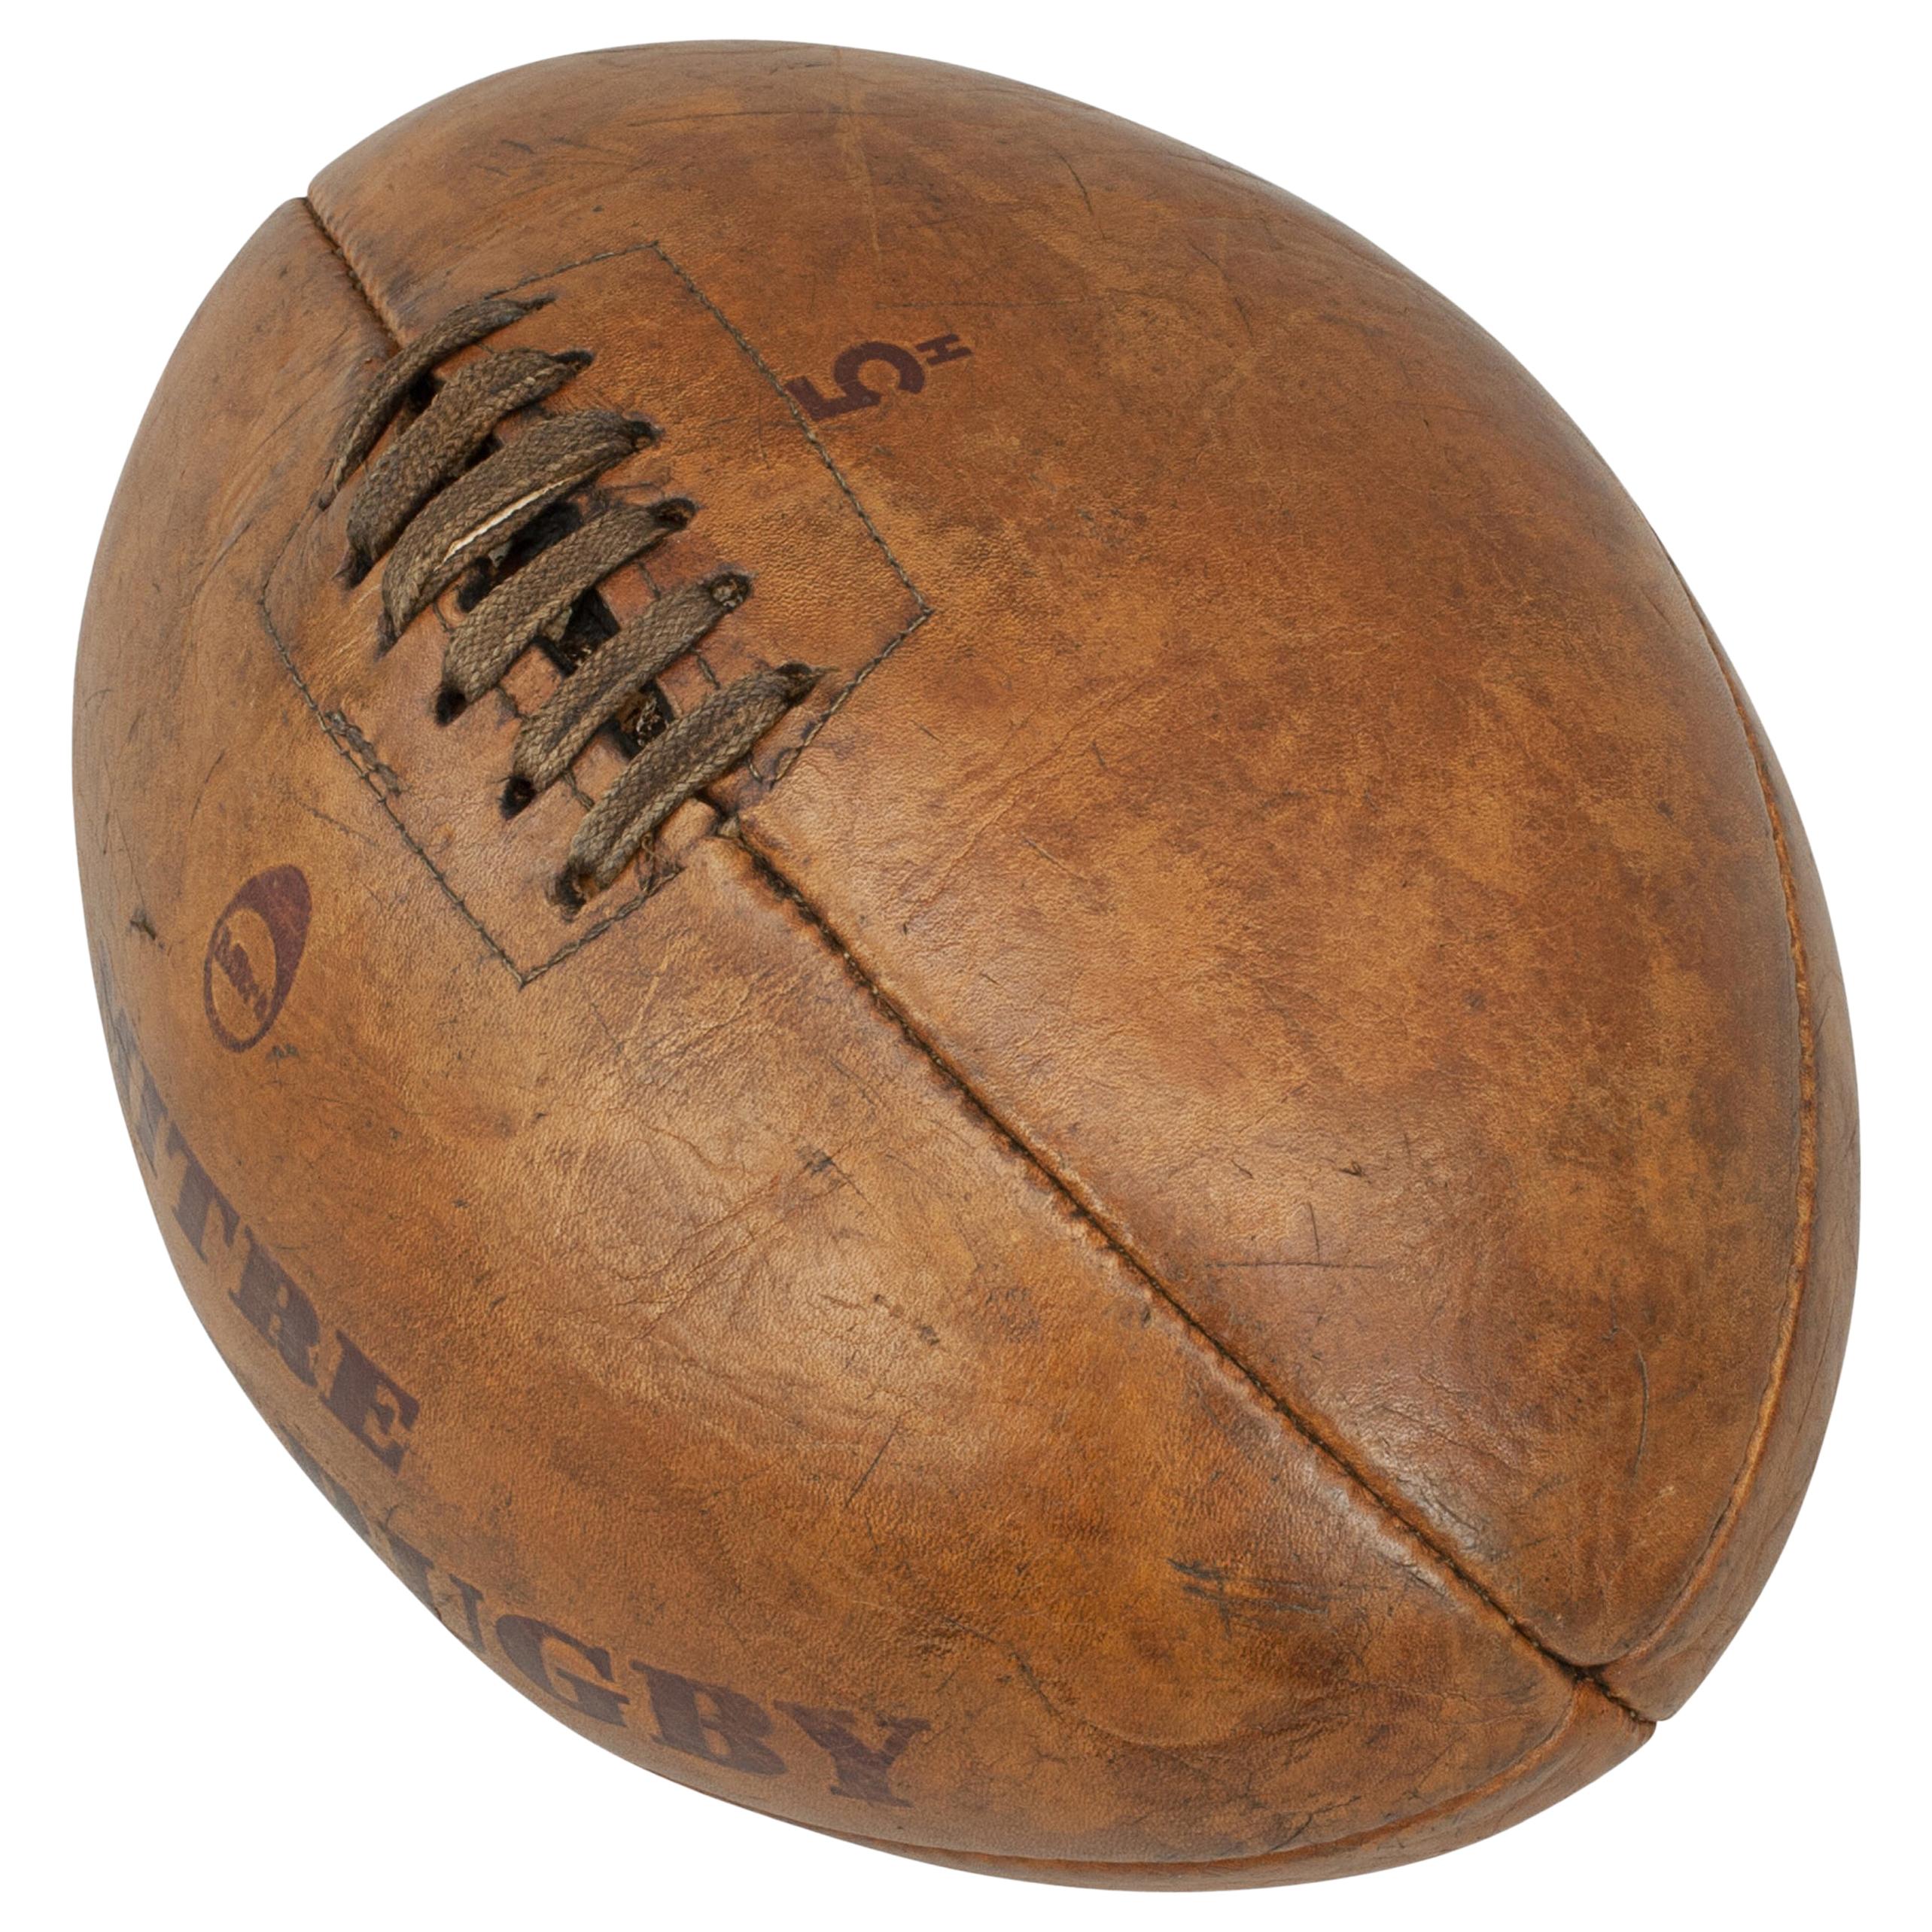 Original Leather Mitre Rugby Ball, No 5, Four-Panel